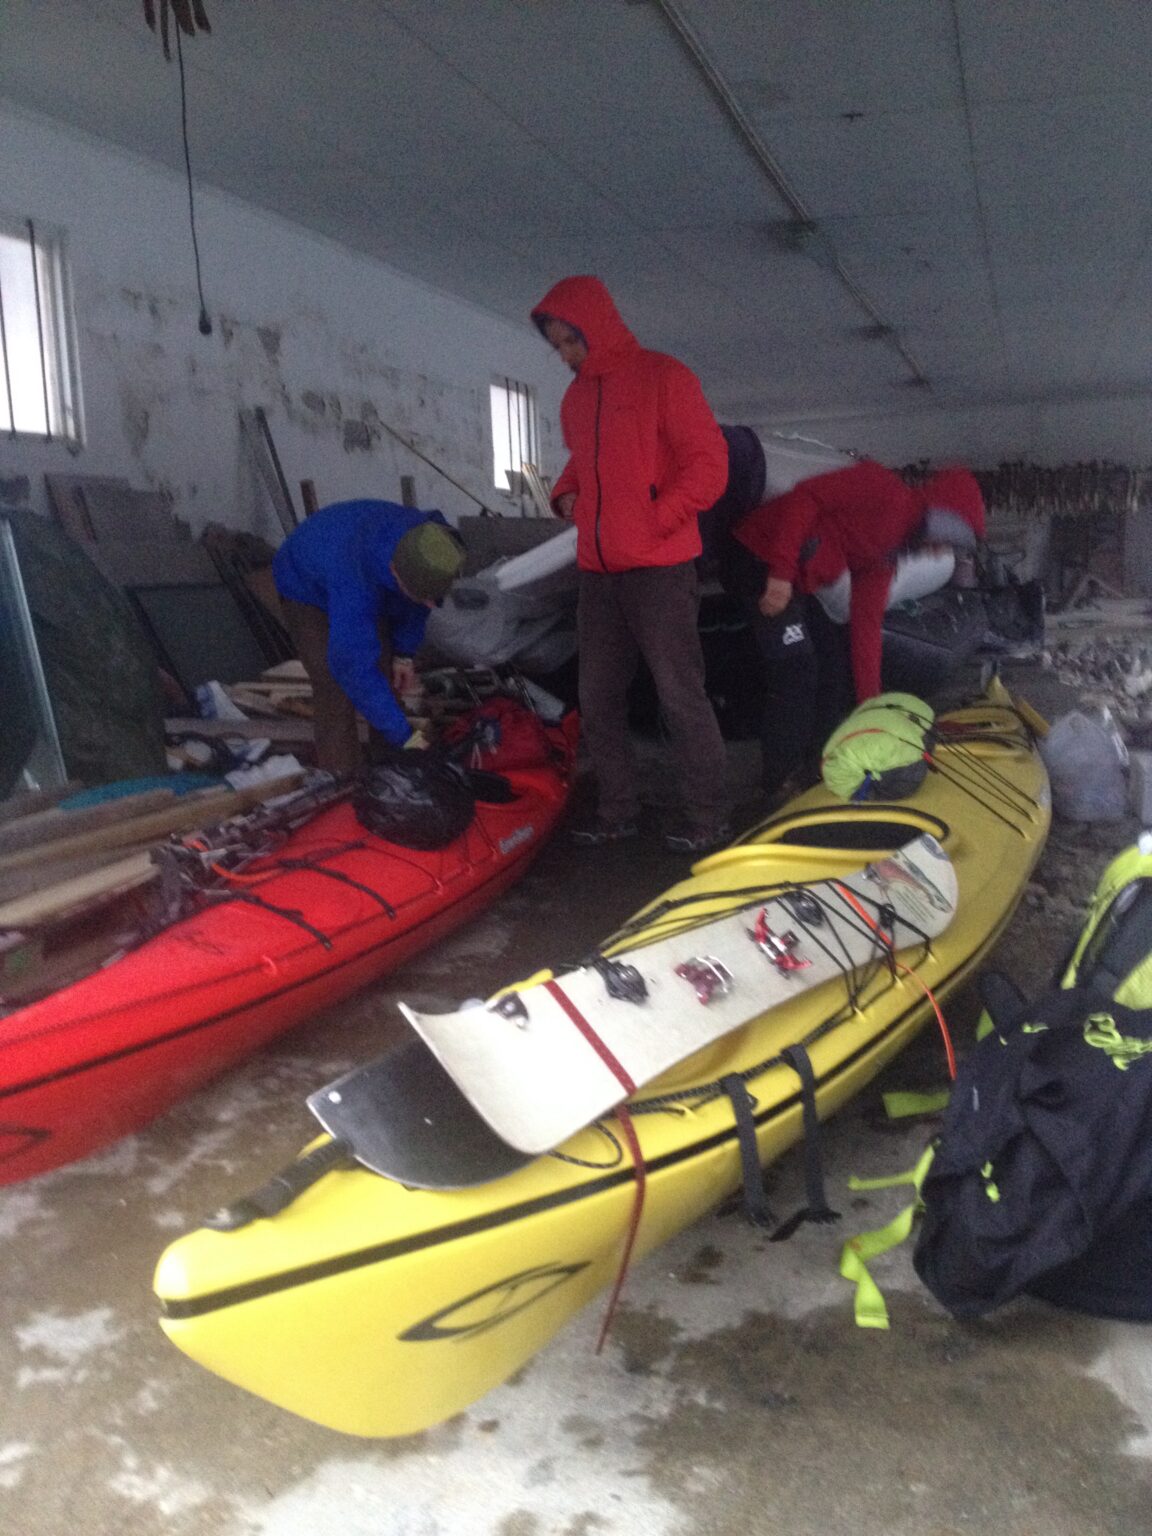 Filling up the Kayaks with ski touring gear